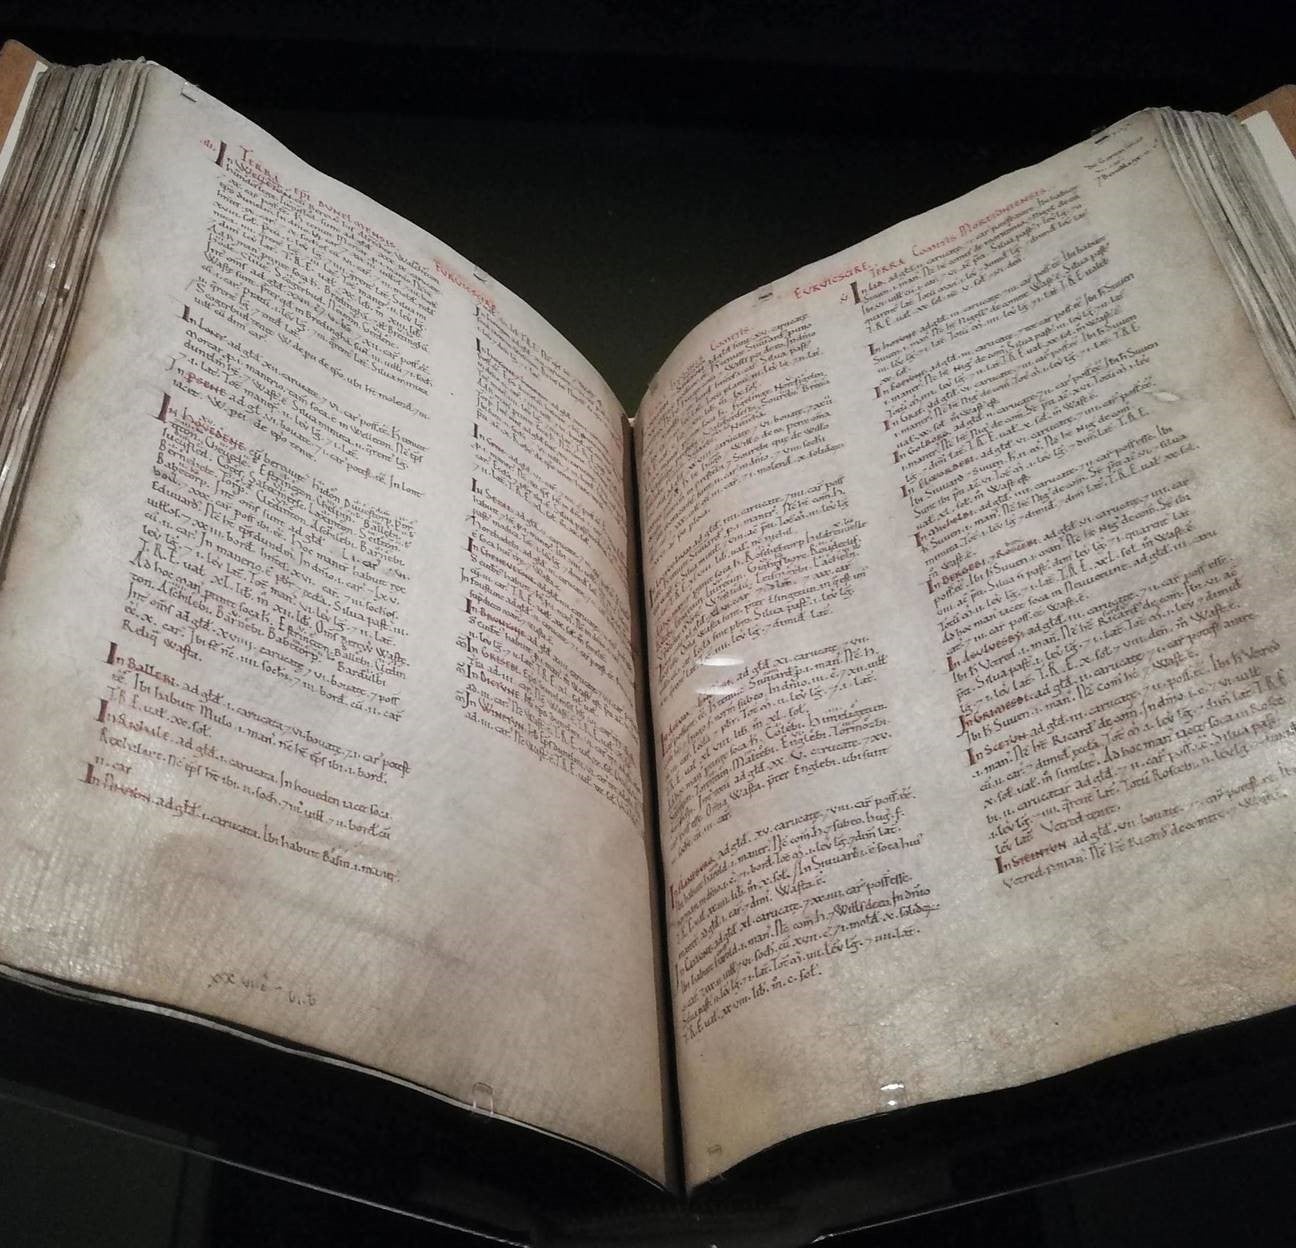 ‘The Domesday Book’: Britain’s earliest public record and one of its most famous books